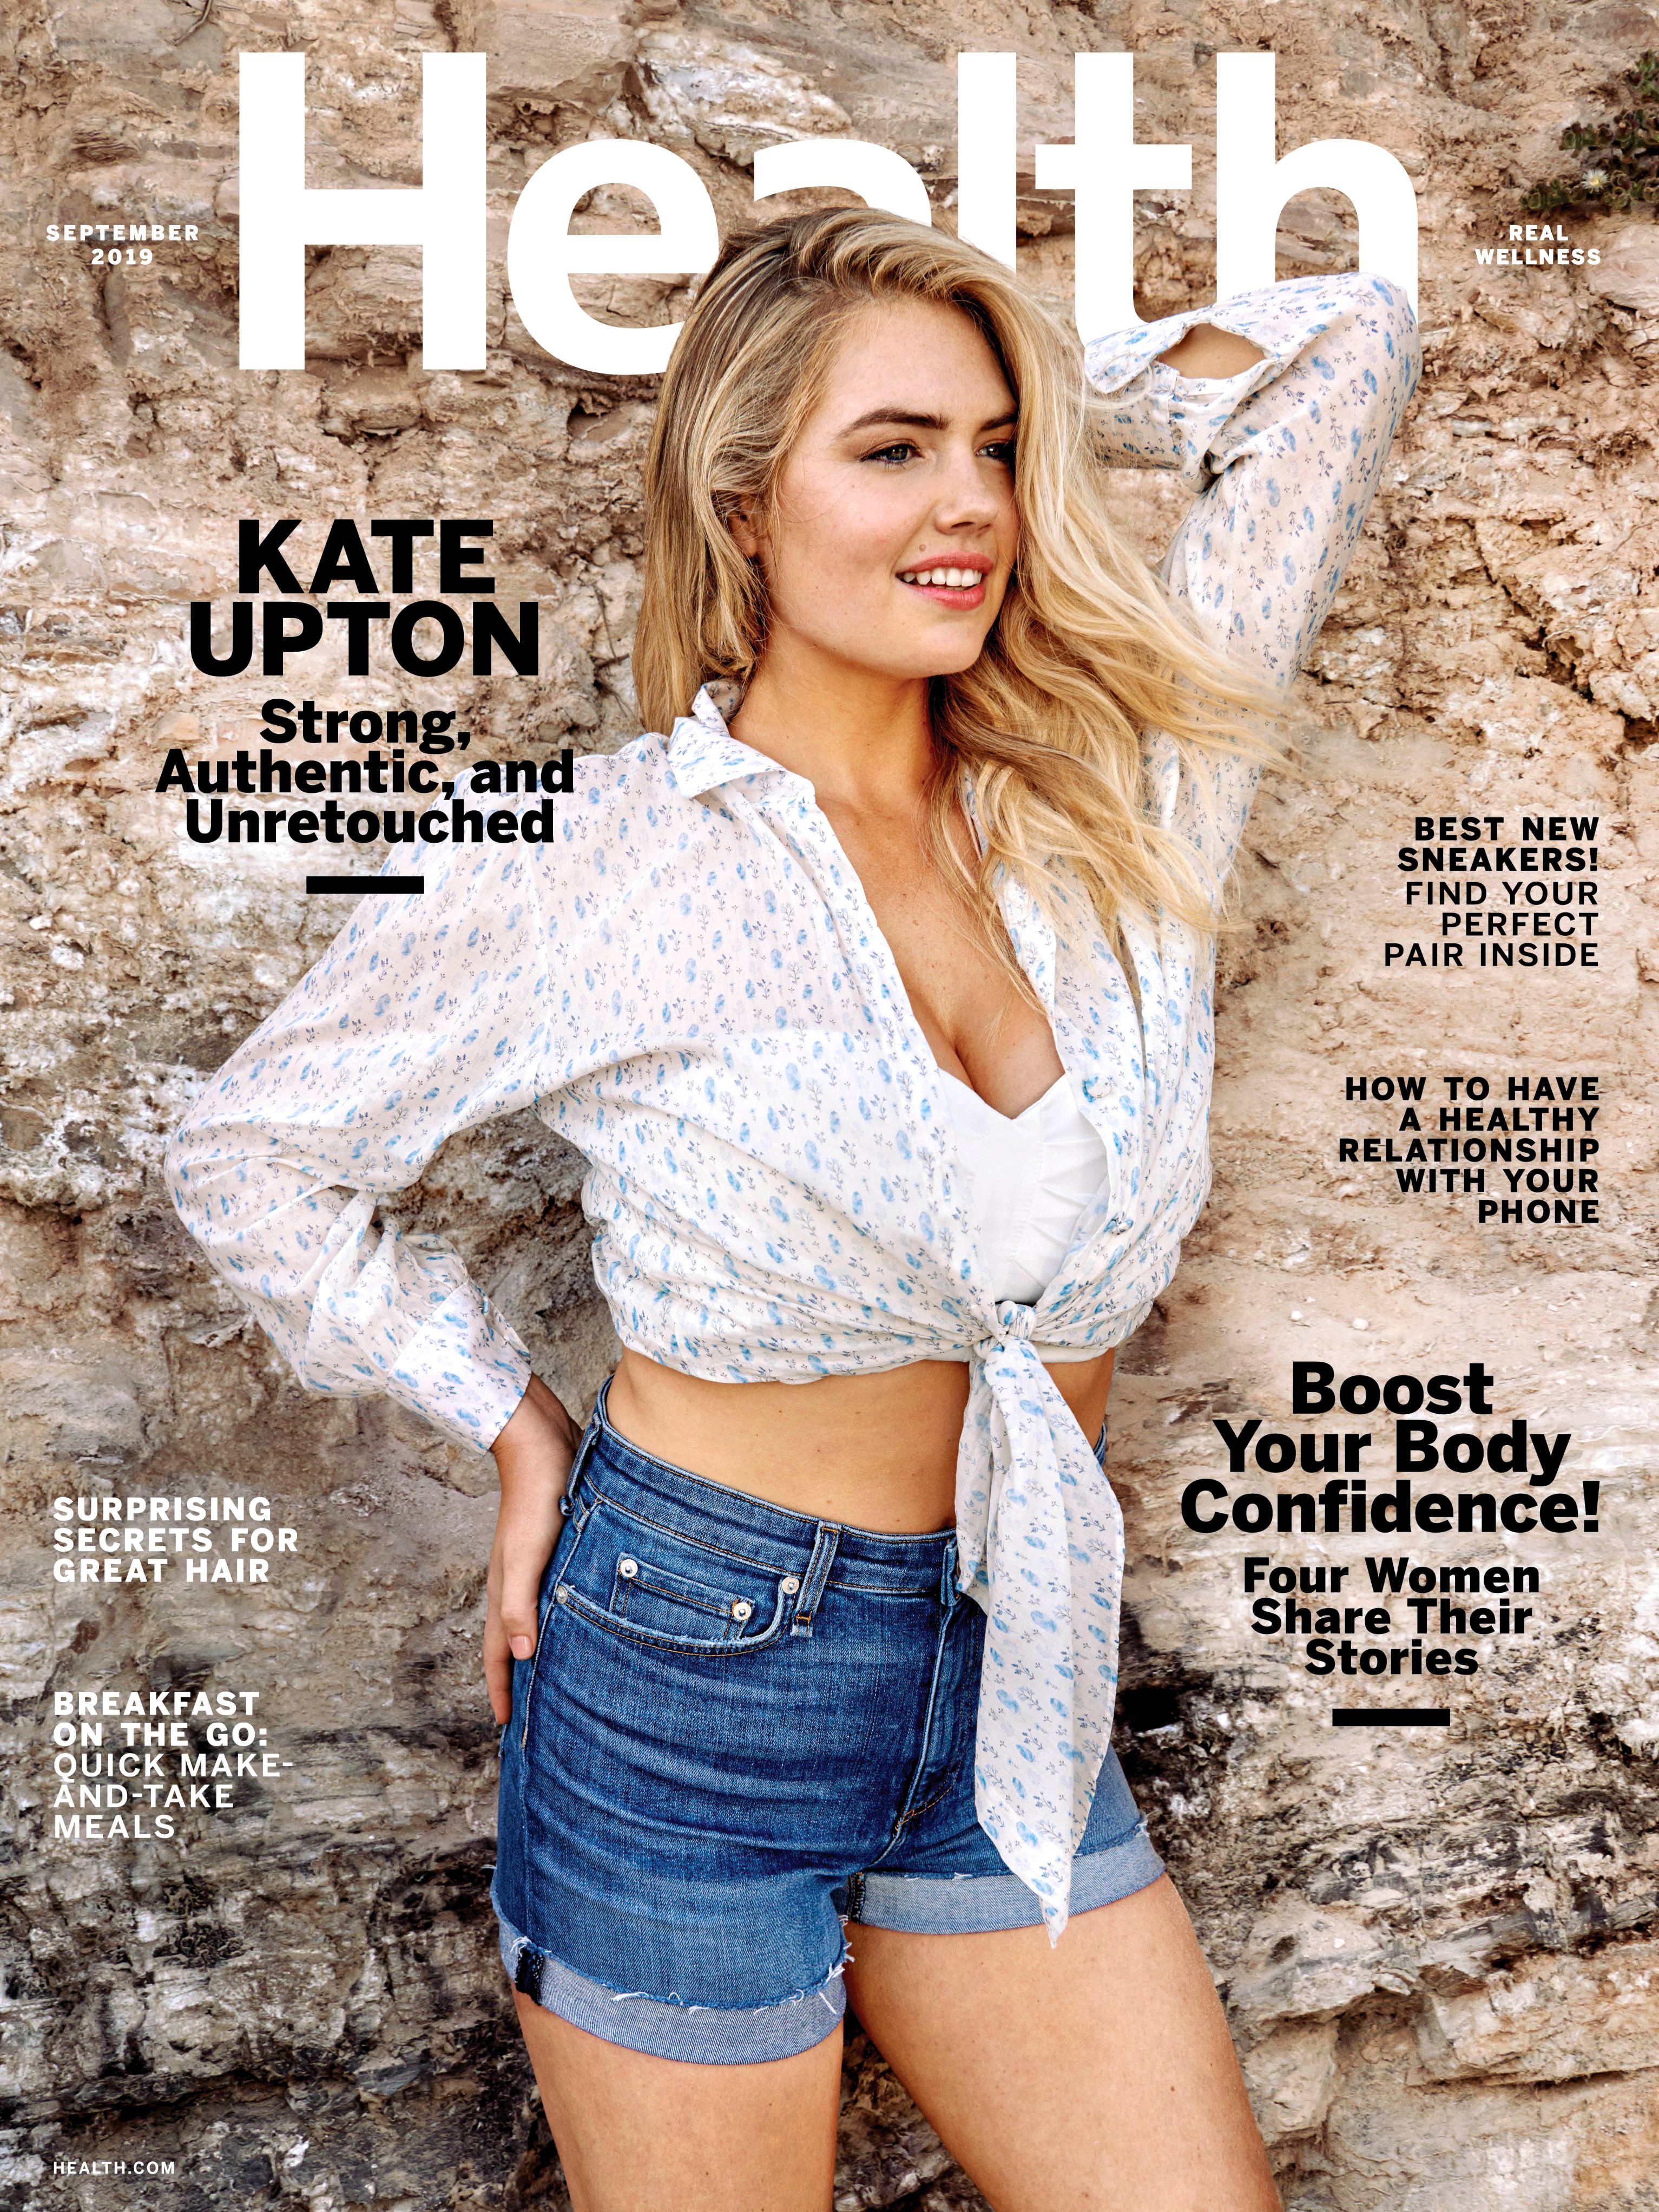 Kate Upton gets real about dropping baby weight at her own pace